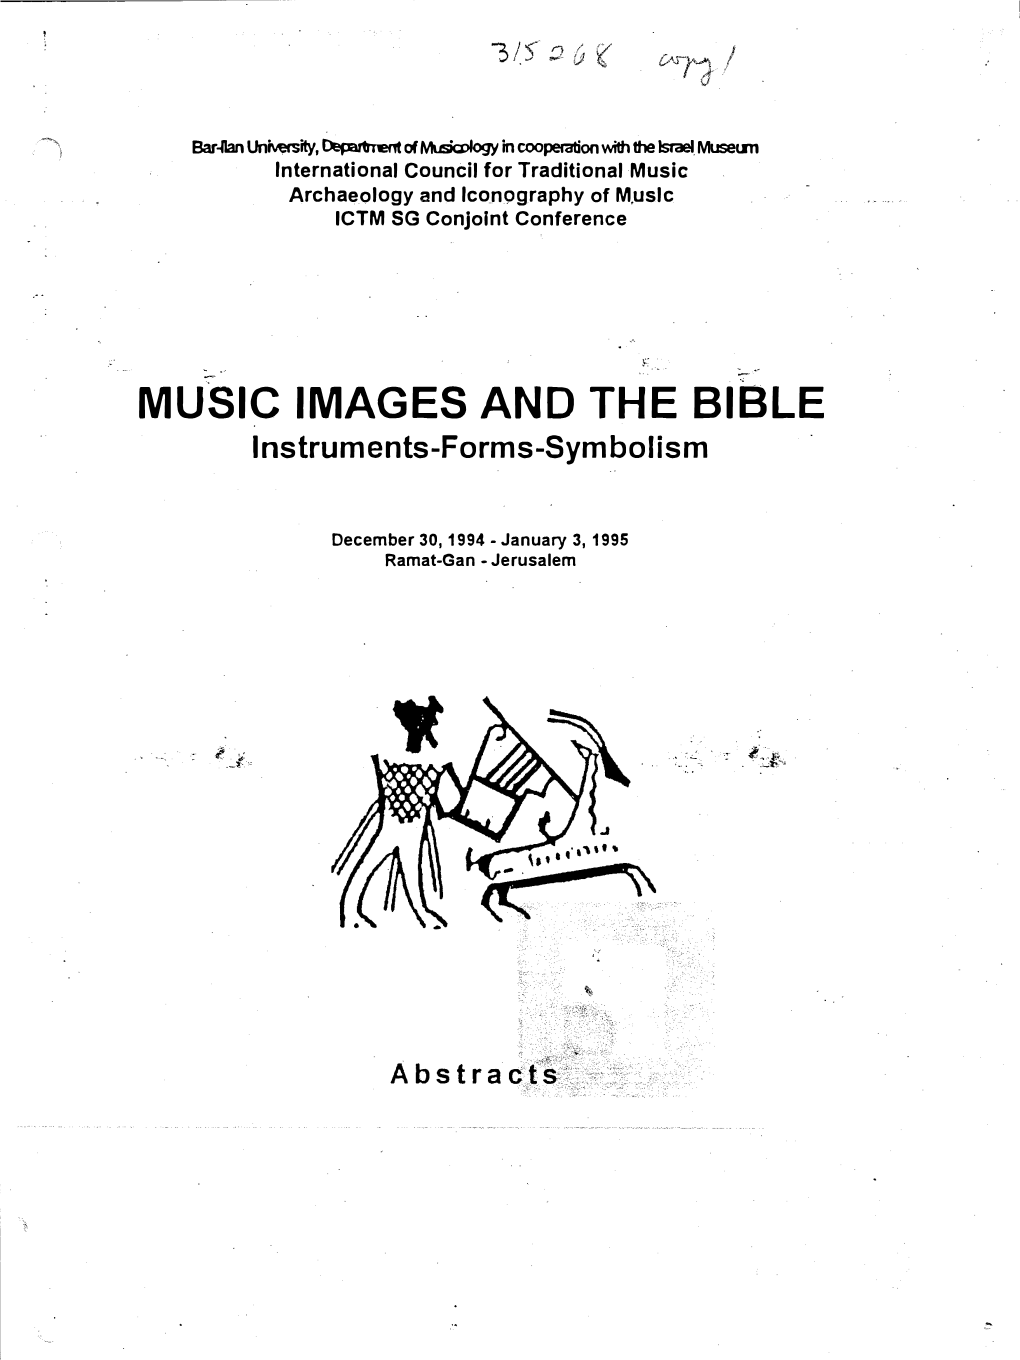 MUSIC IMAGES and the BIBLE Instruments-Forms-Symbolism